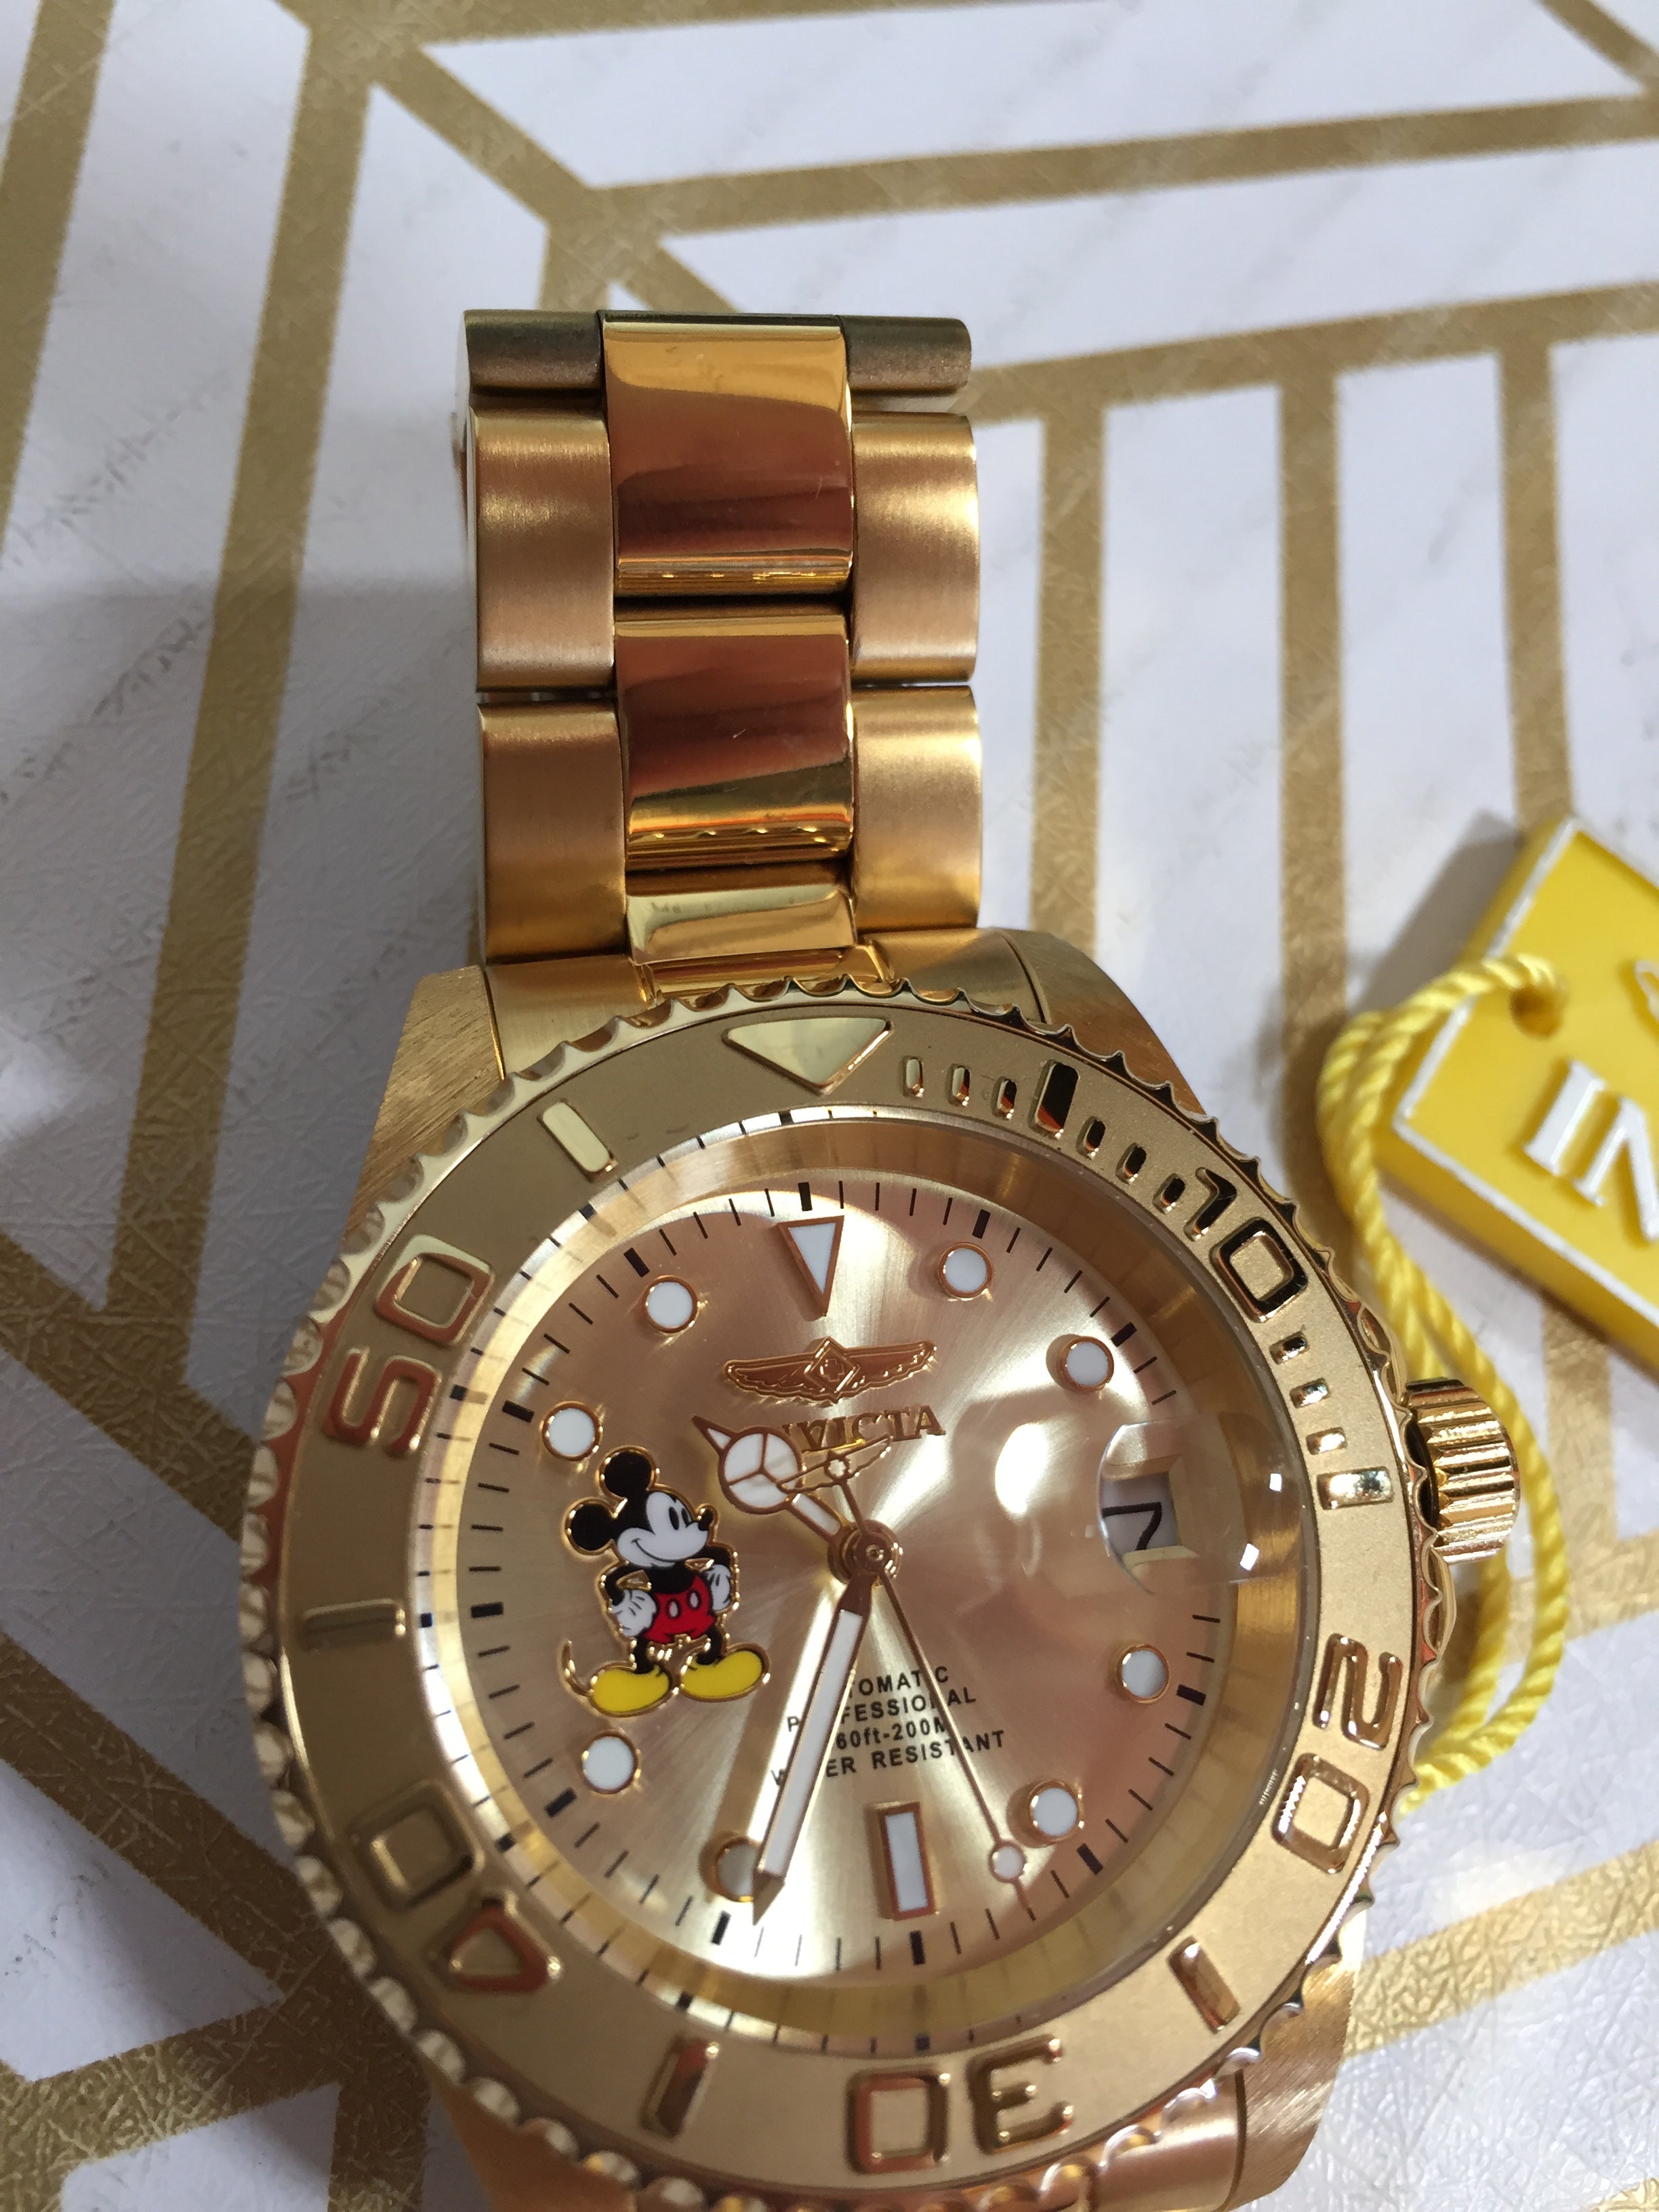 Invicta Mickey Mouse Men's 22779 Disney Limited Edition Analog Gold Watch (7746688024814)